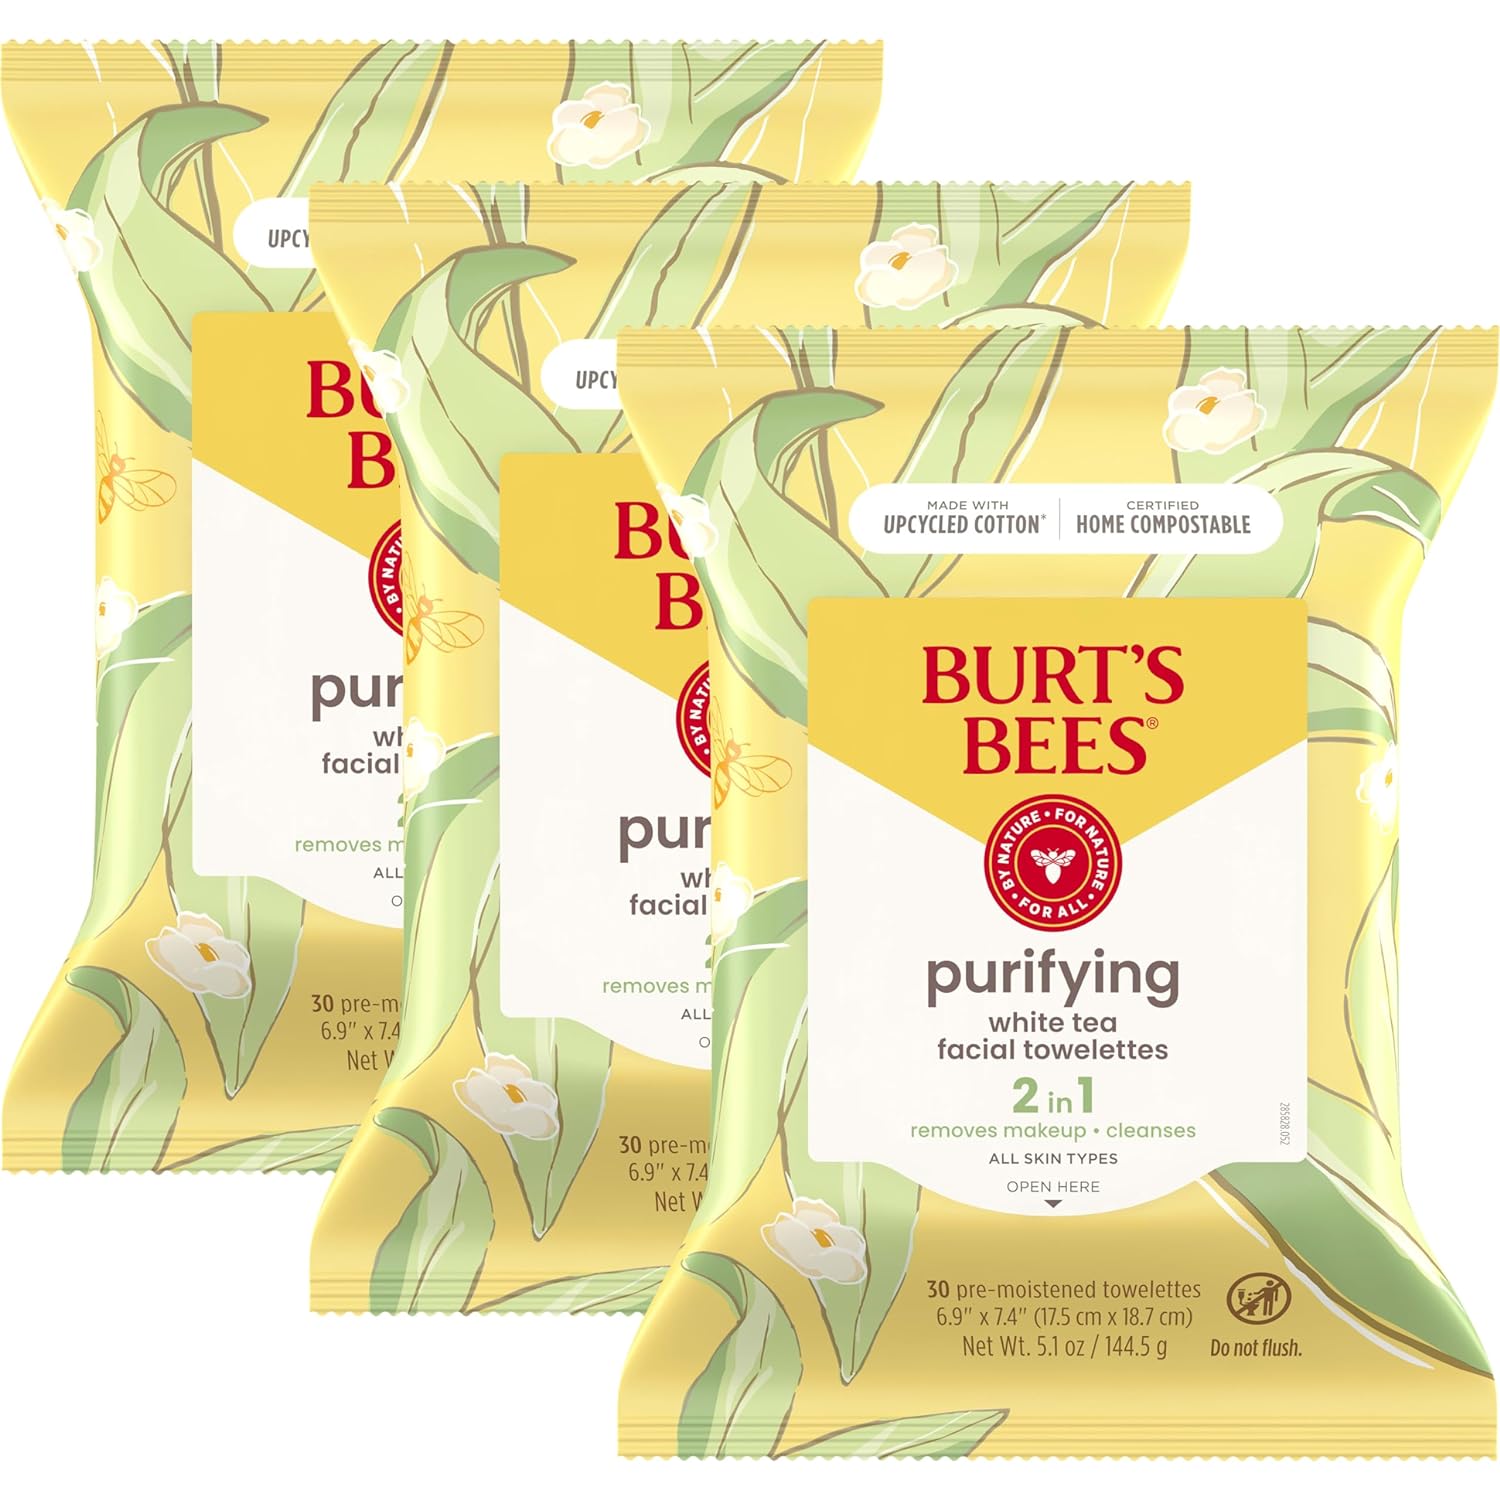 Burt's Bees White Tea Face Wipes, Mothers Day Gifts for Mom for All Skin Types, Hydrating Makeup Remover & Facial Cleansing Towelettes, 30 Ct. (3-Pack)